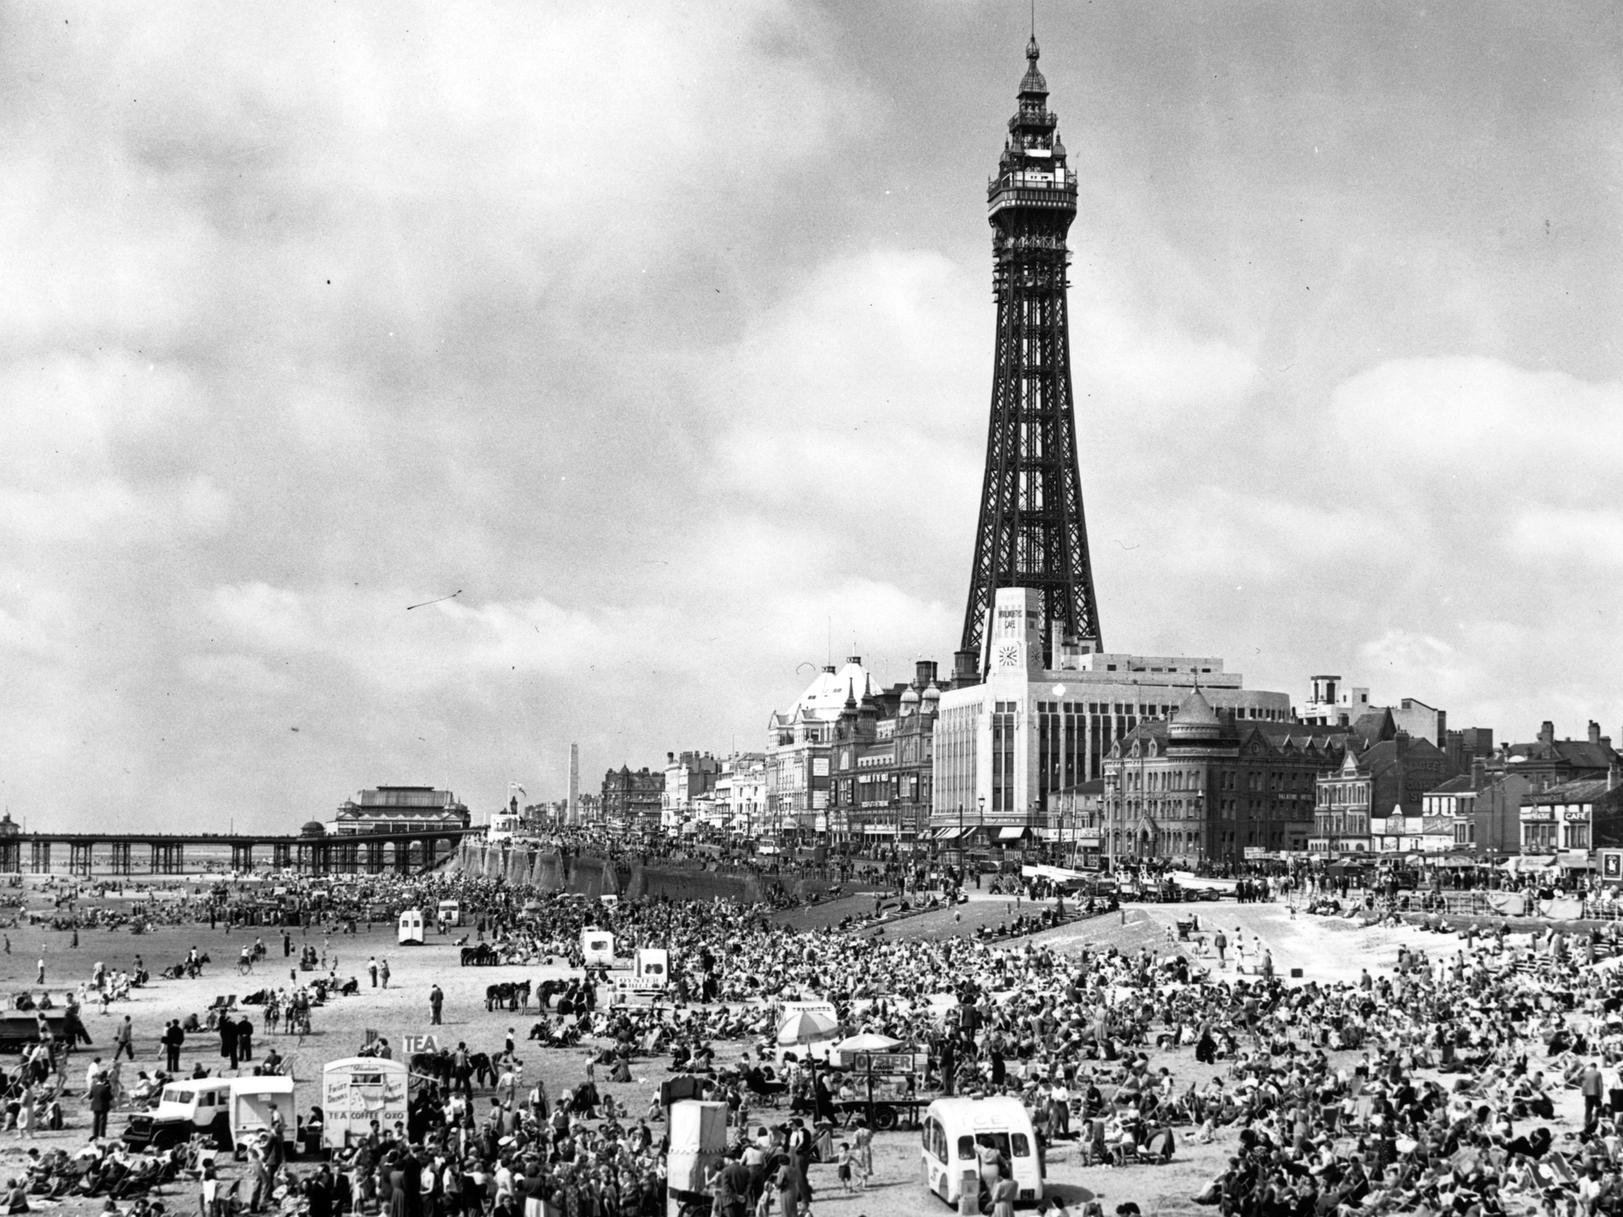 Crowds of holiday-makers on the beach at Blackpool, Lancashire, dominated by the Blackpool Tower on July 18, 1951